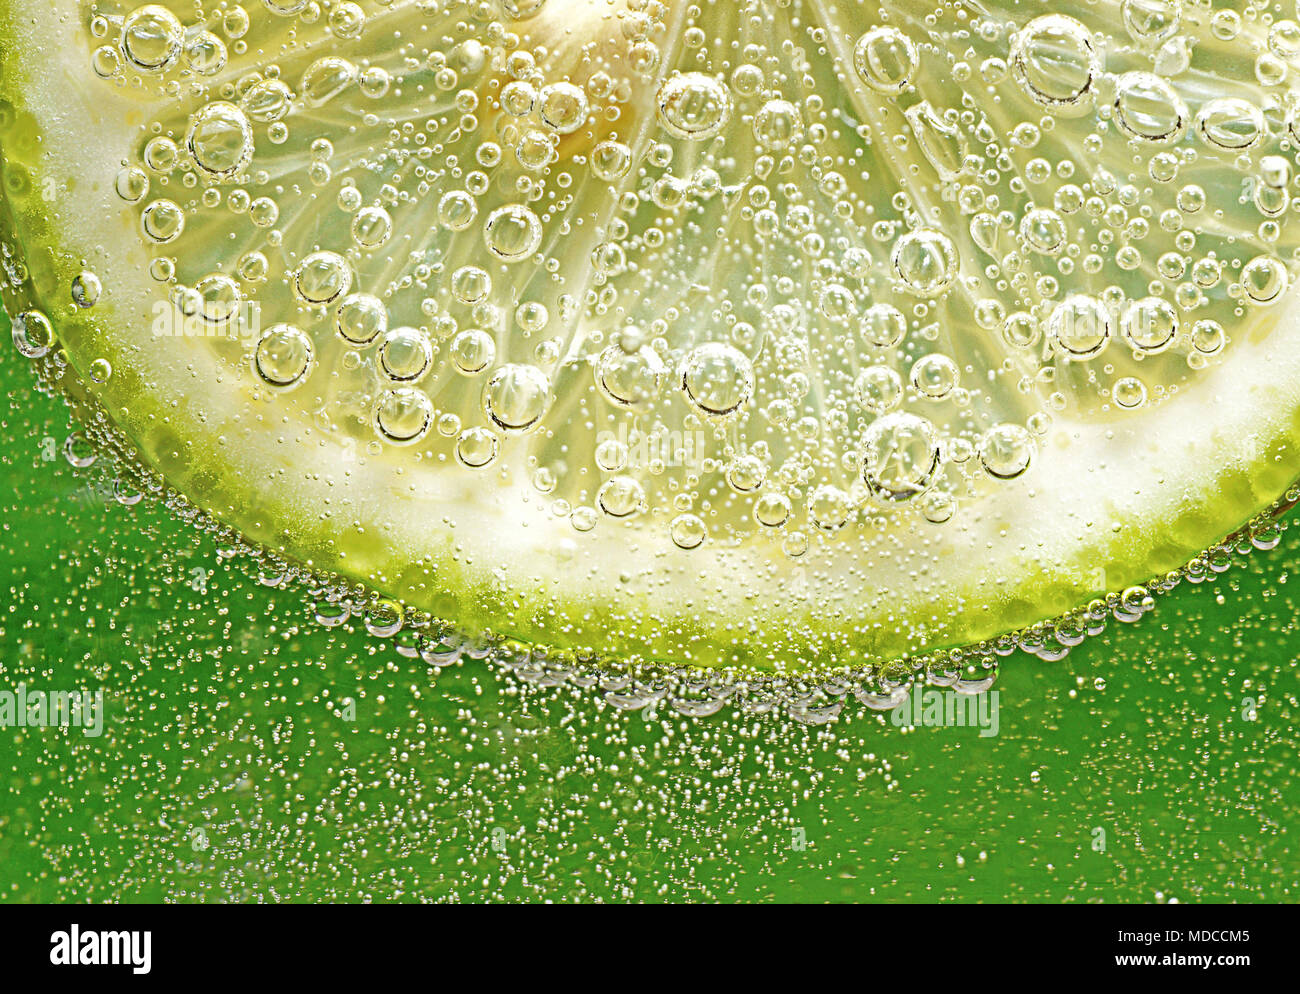 Effervescent Lime - Active Stock Photo